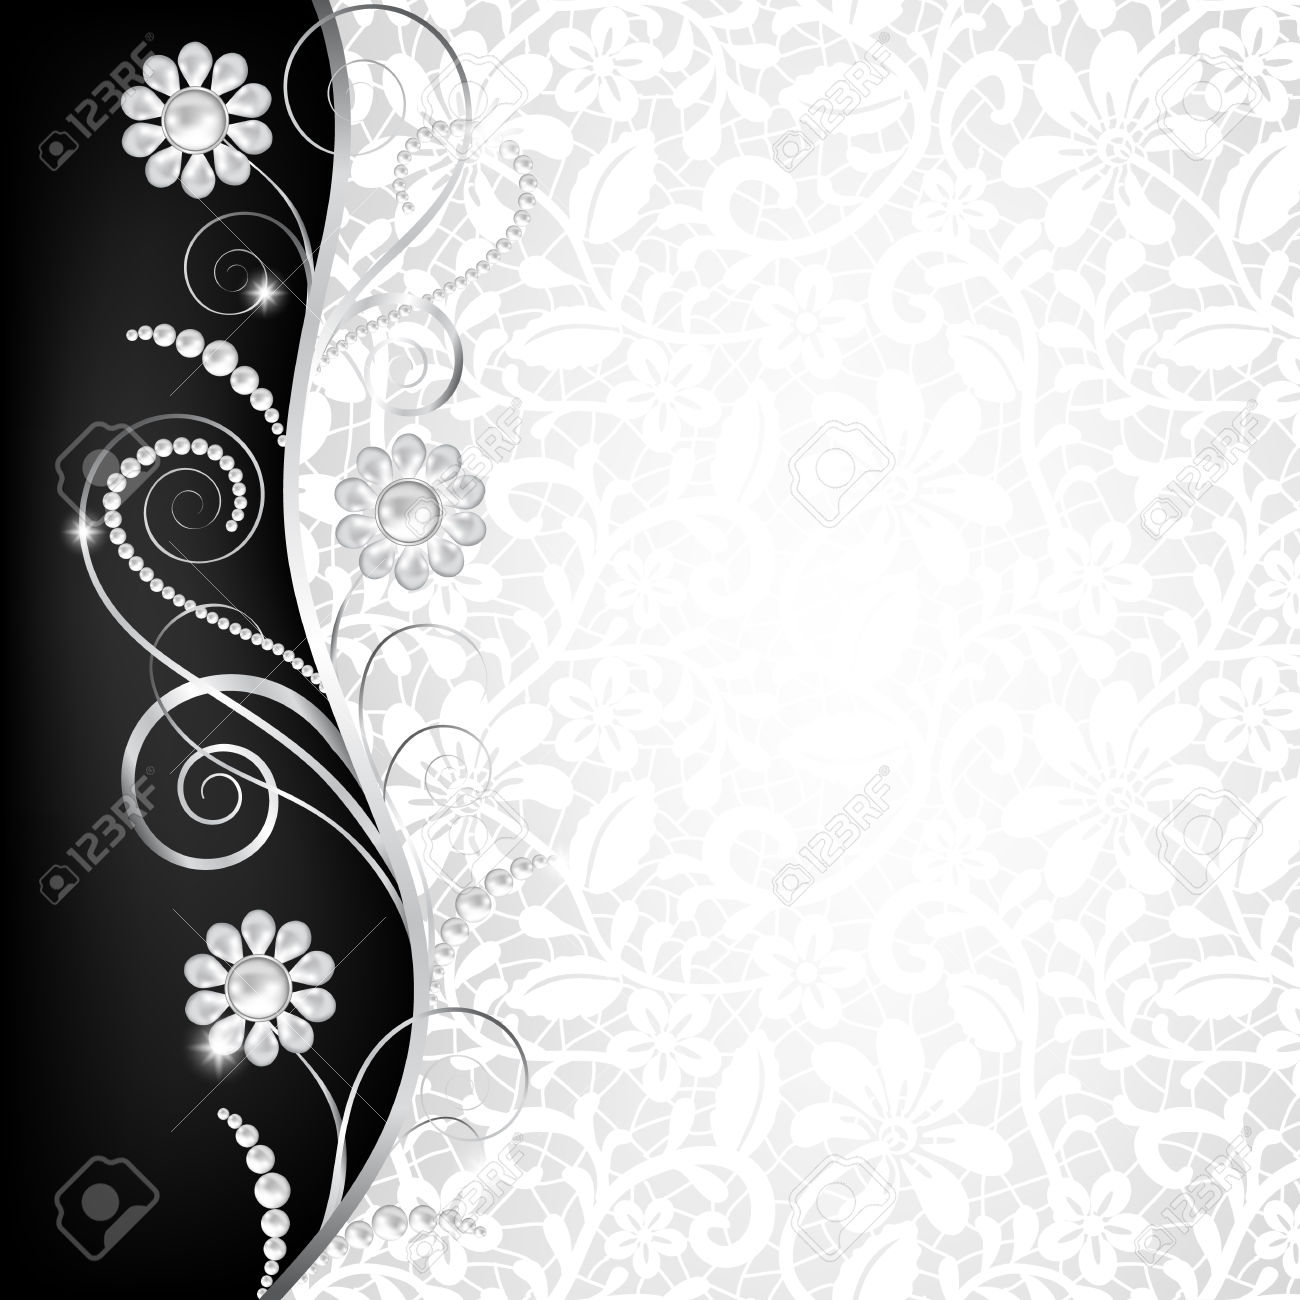 vip wallpaper hd,text,pattern,black and white,design,floral design